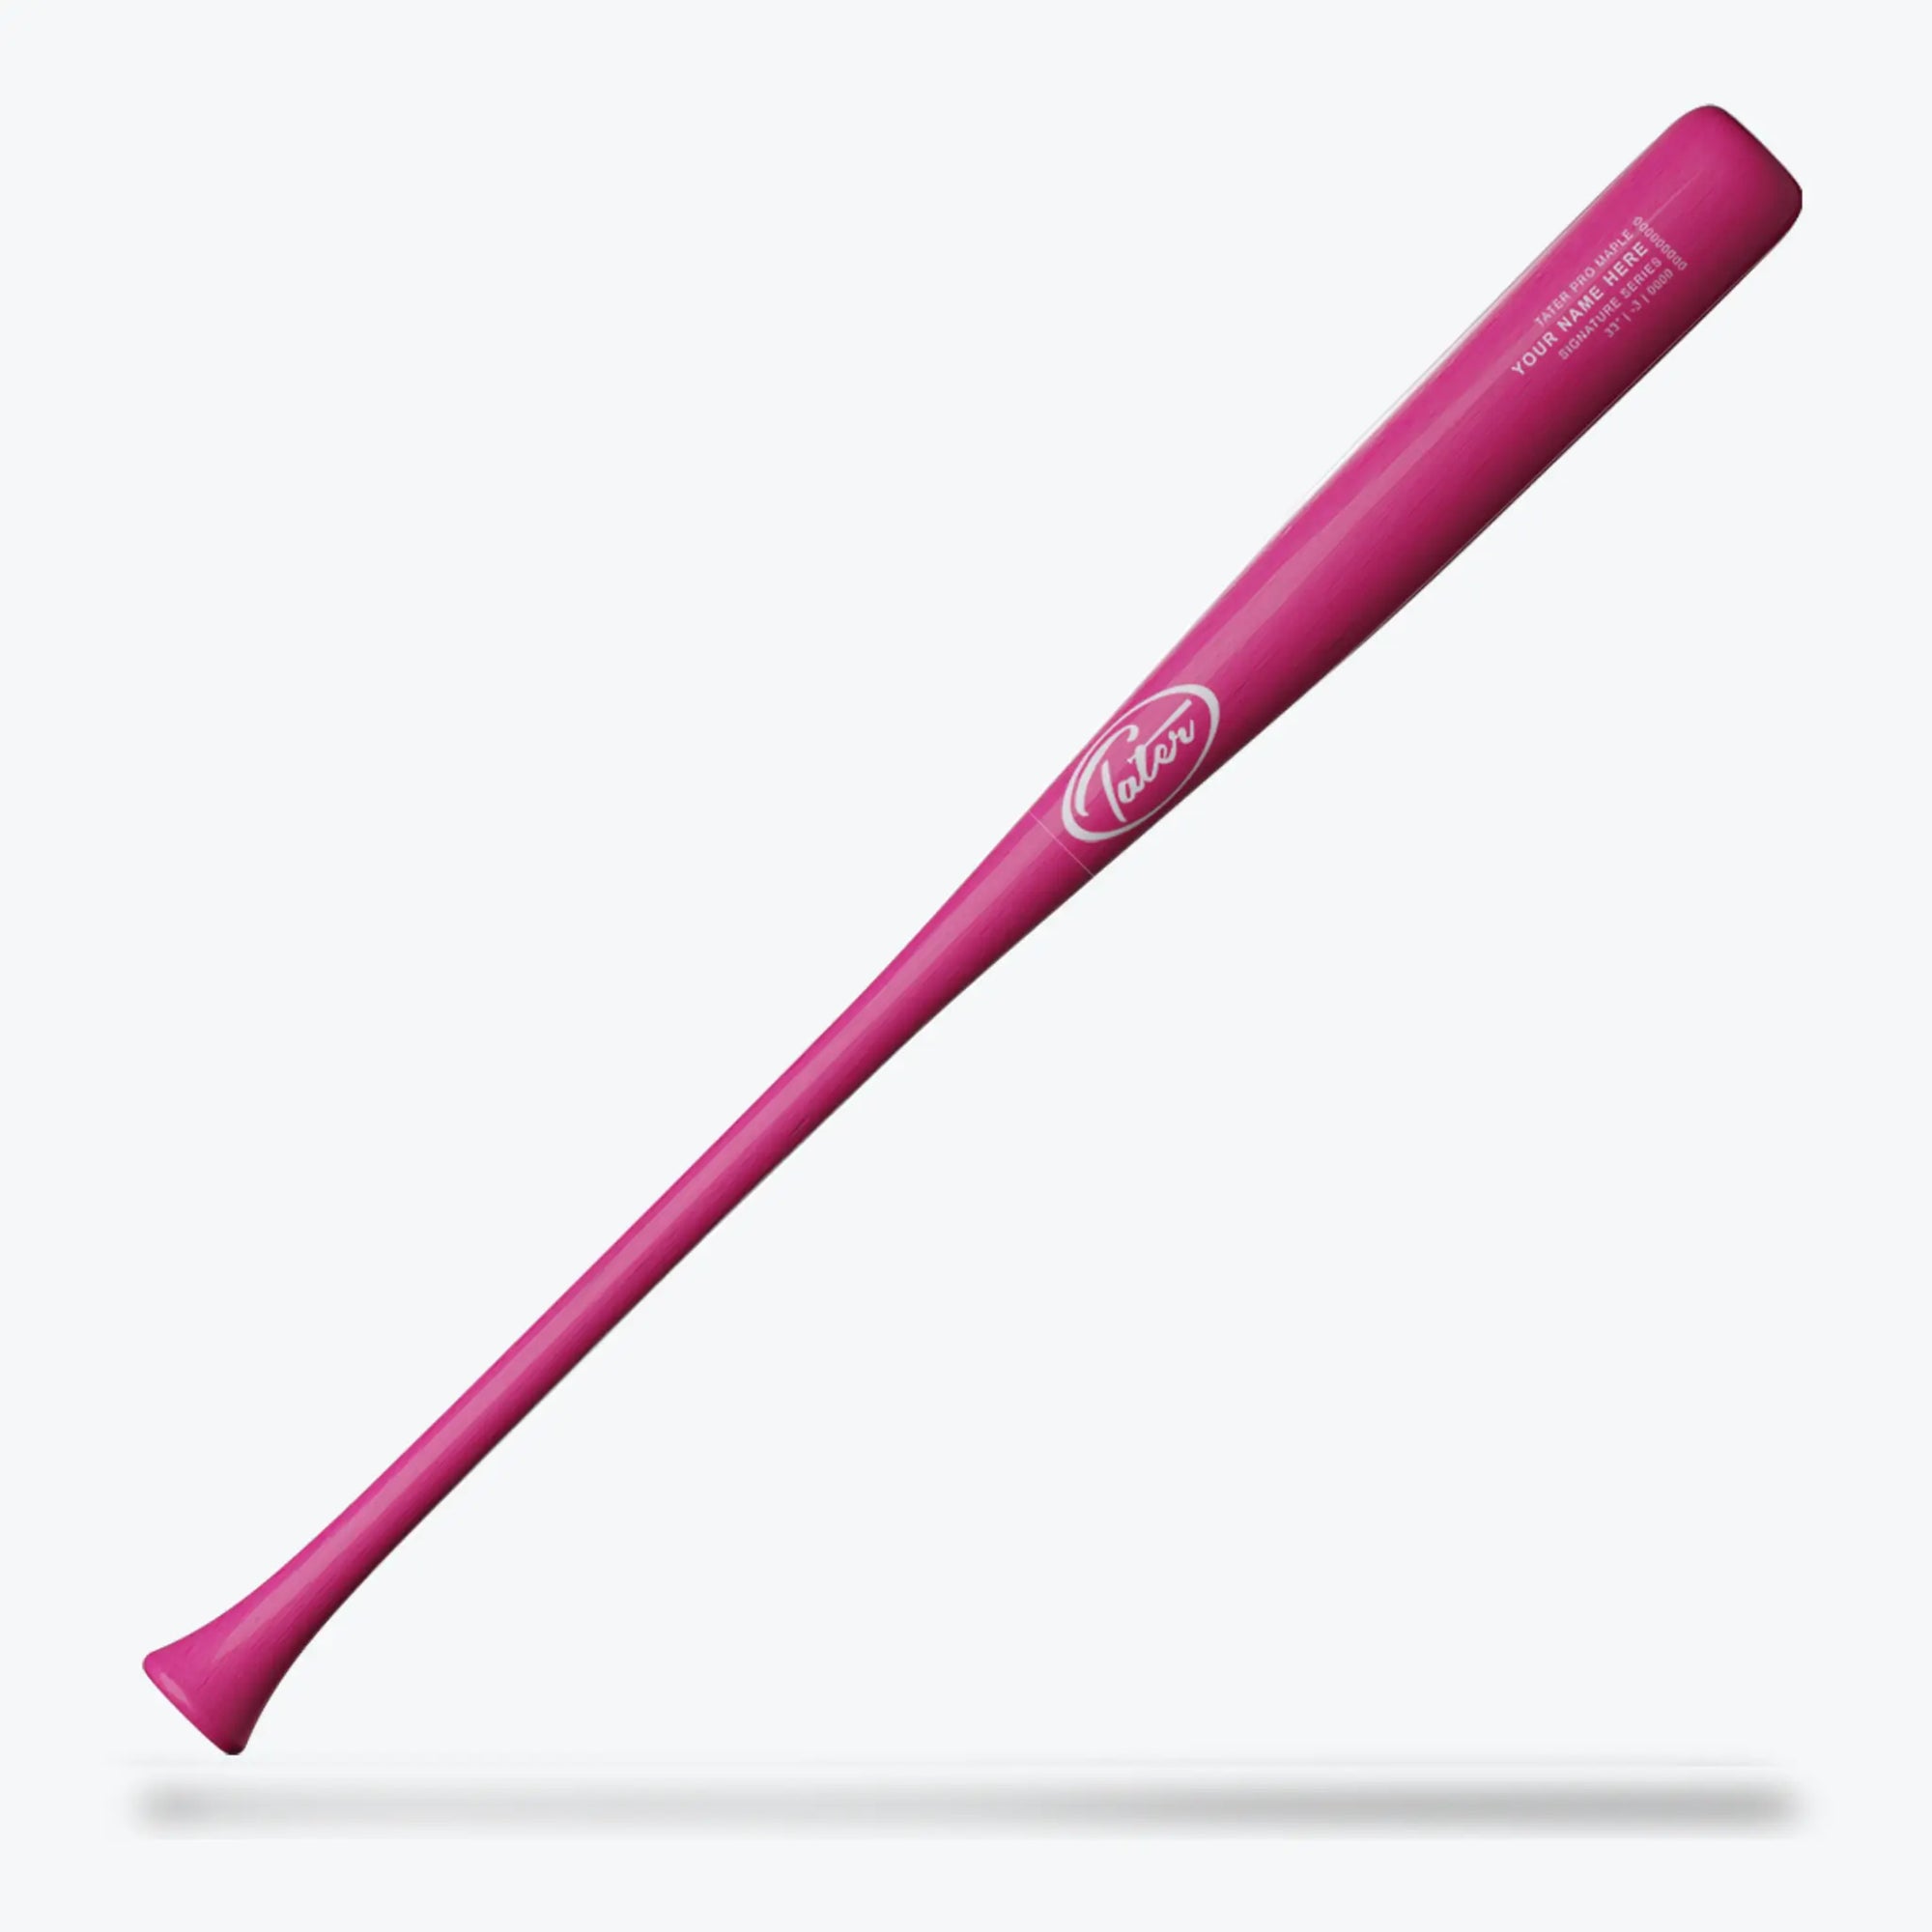 Here's the Tater Baseball U238 custom wood bat, painted in a bold, uniform magenta. The bat features a knobless end, a slight end-load design, and comes in lengths of 31, 32, or 33 inches with a drop-3 weight. It's tailored for hitters who prefer a distinctive look without sacrificing performance.